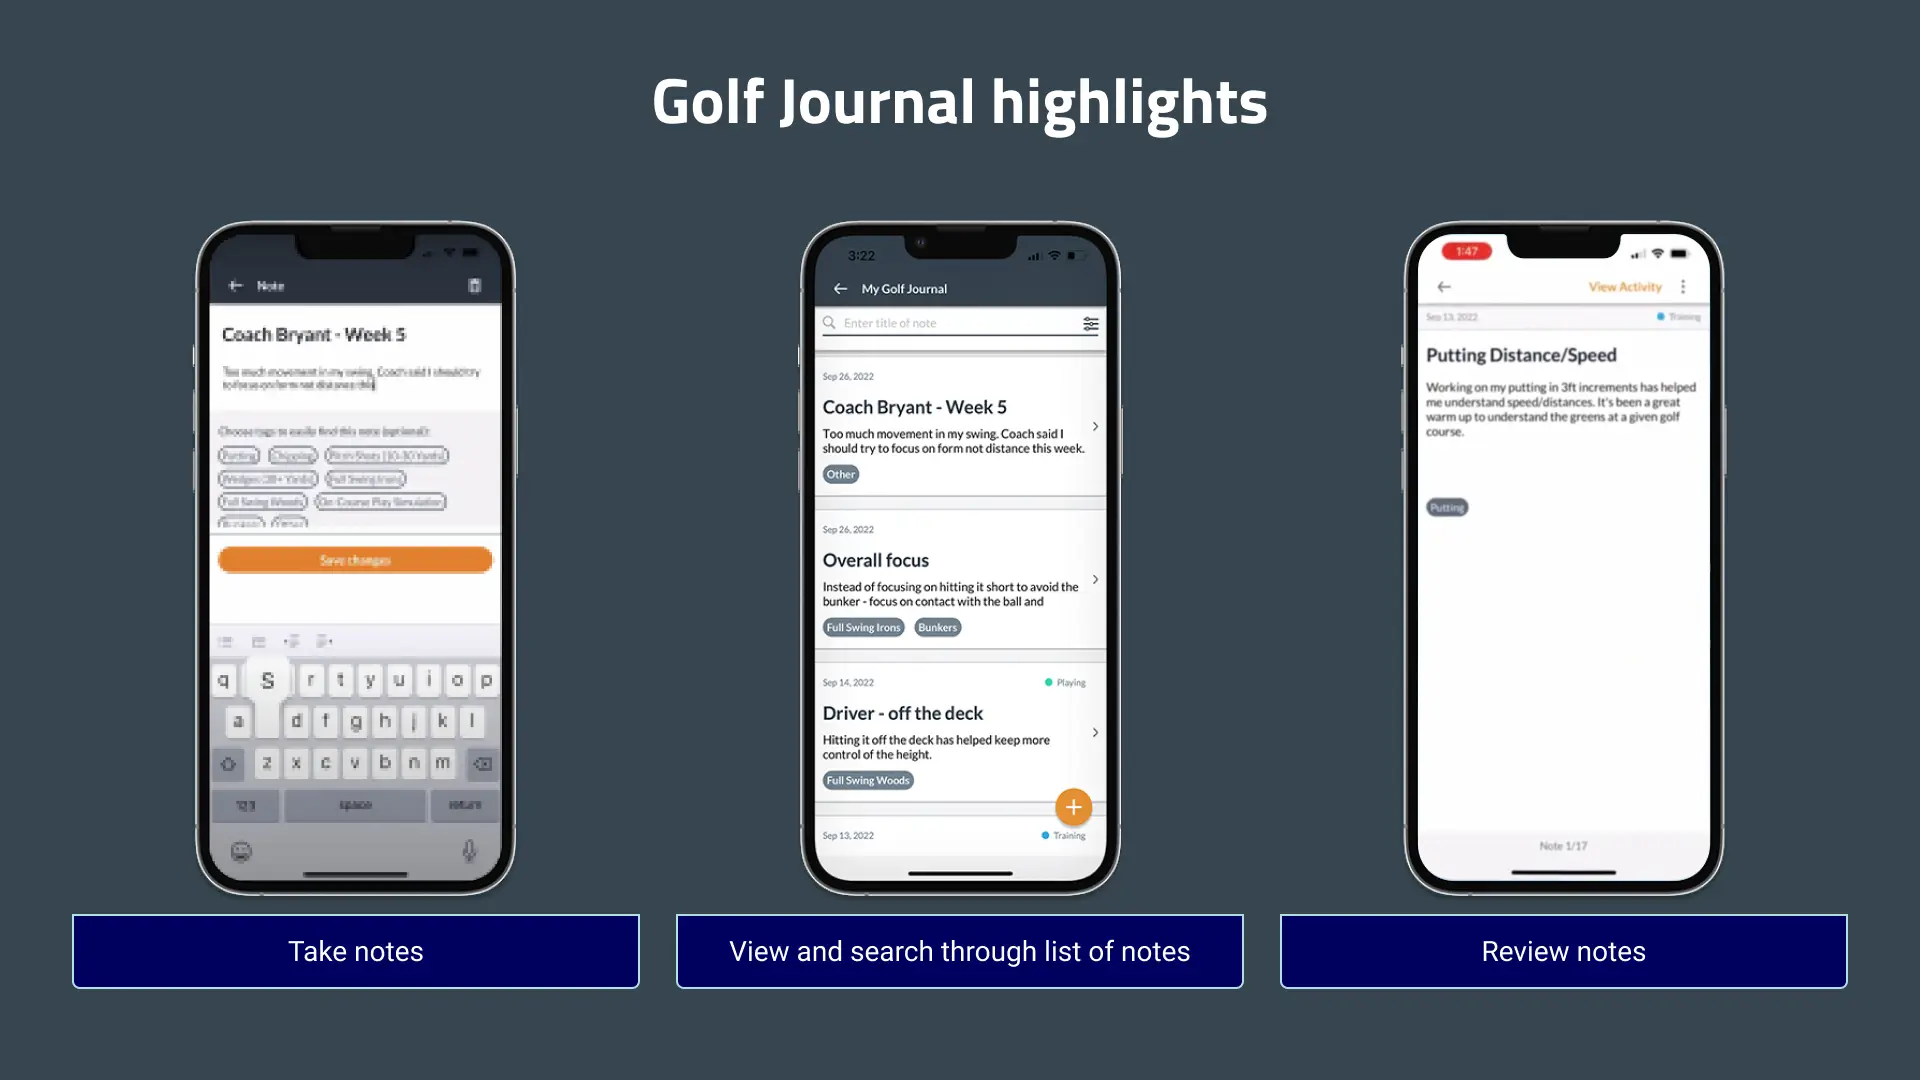 Key features of the Golf Journal.